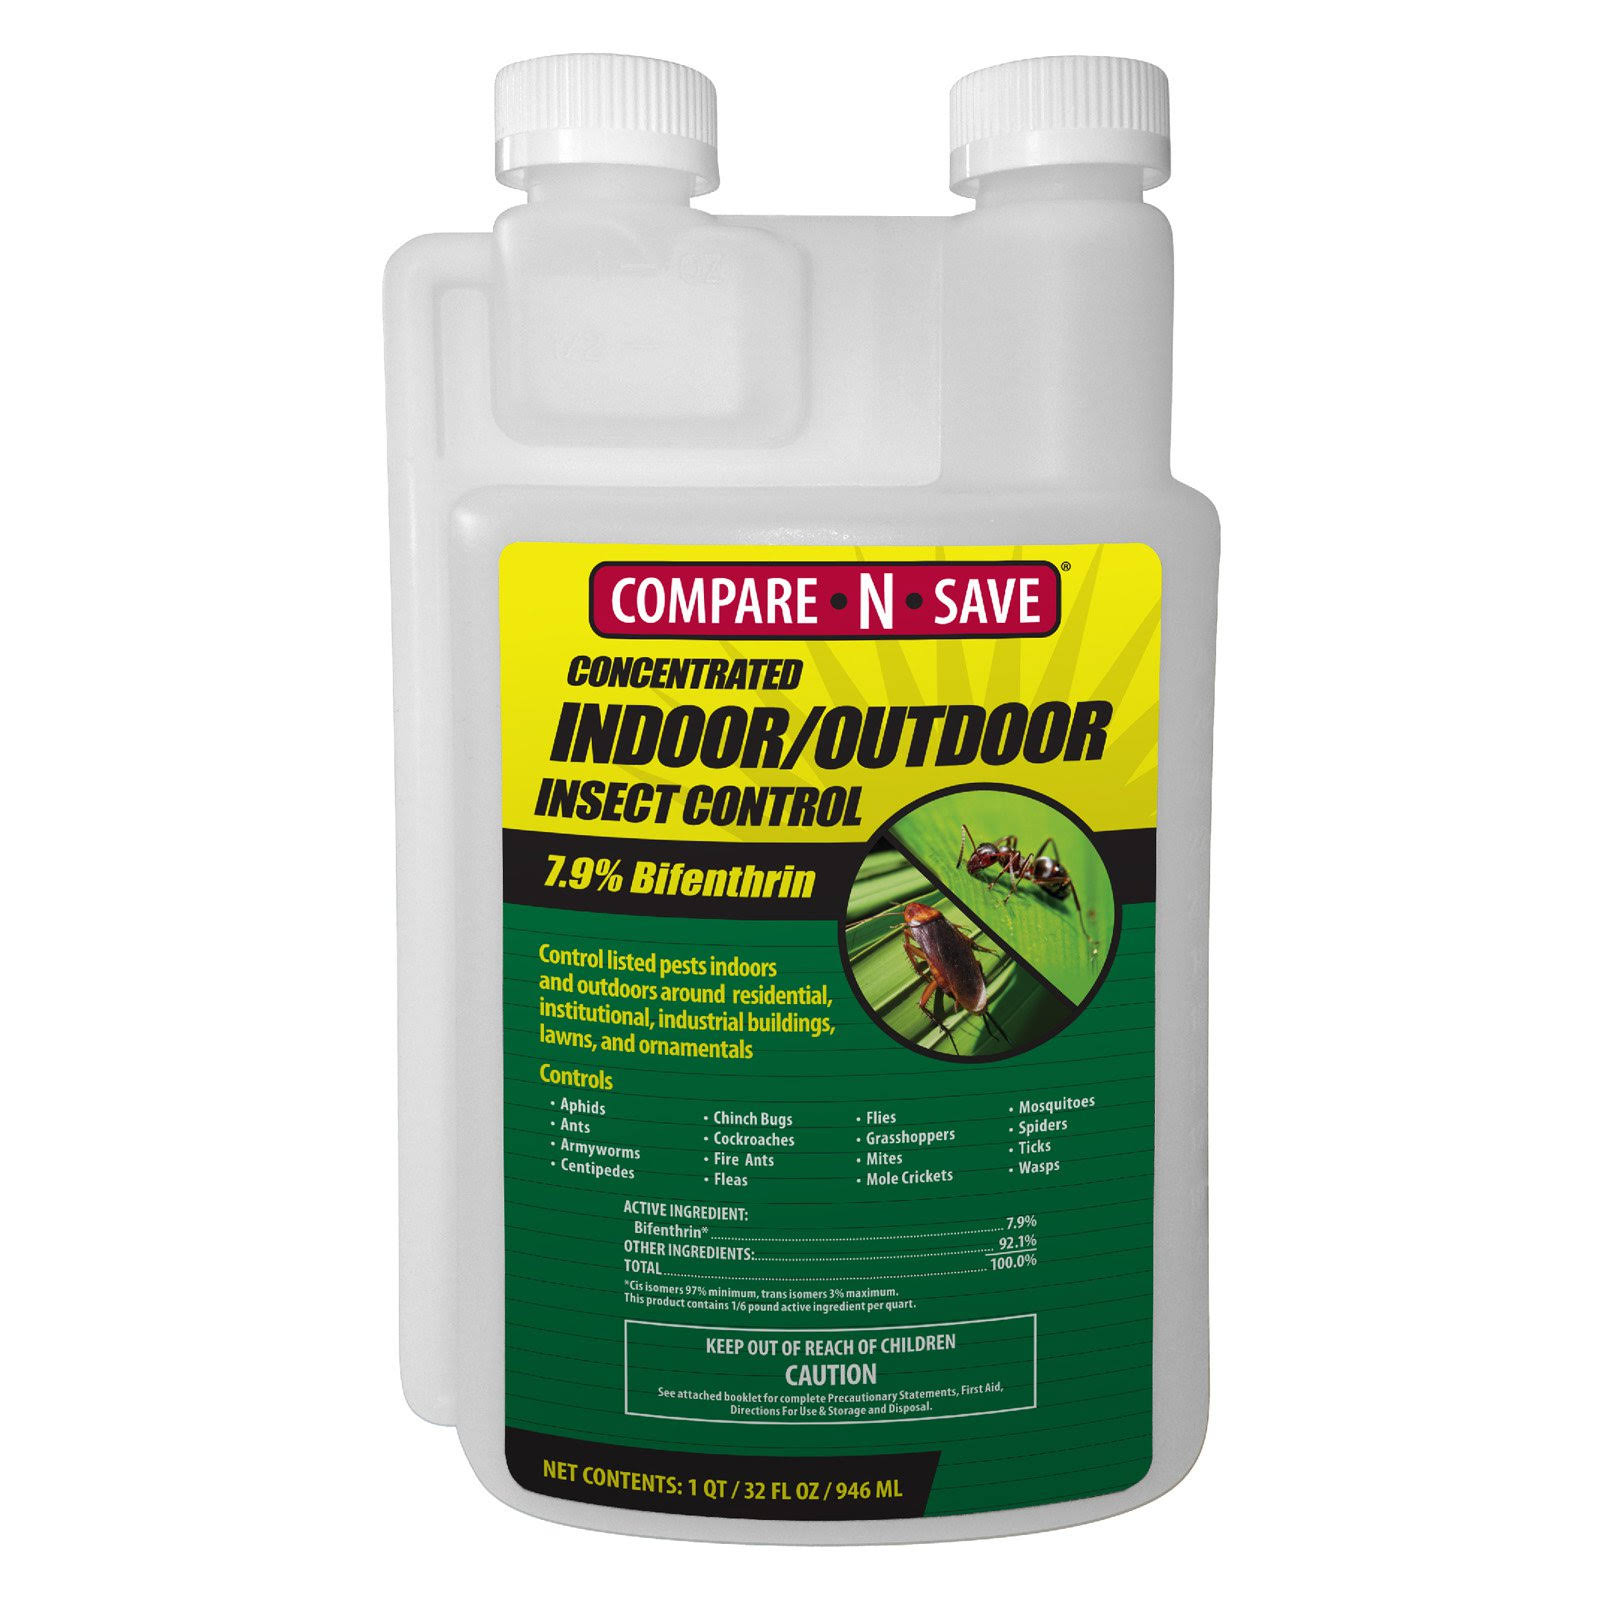 Compare N Save Concentrate Indoor and Outdoor Insect Control - 32oz